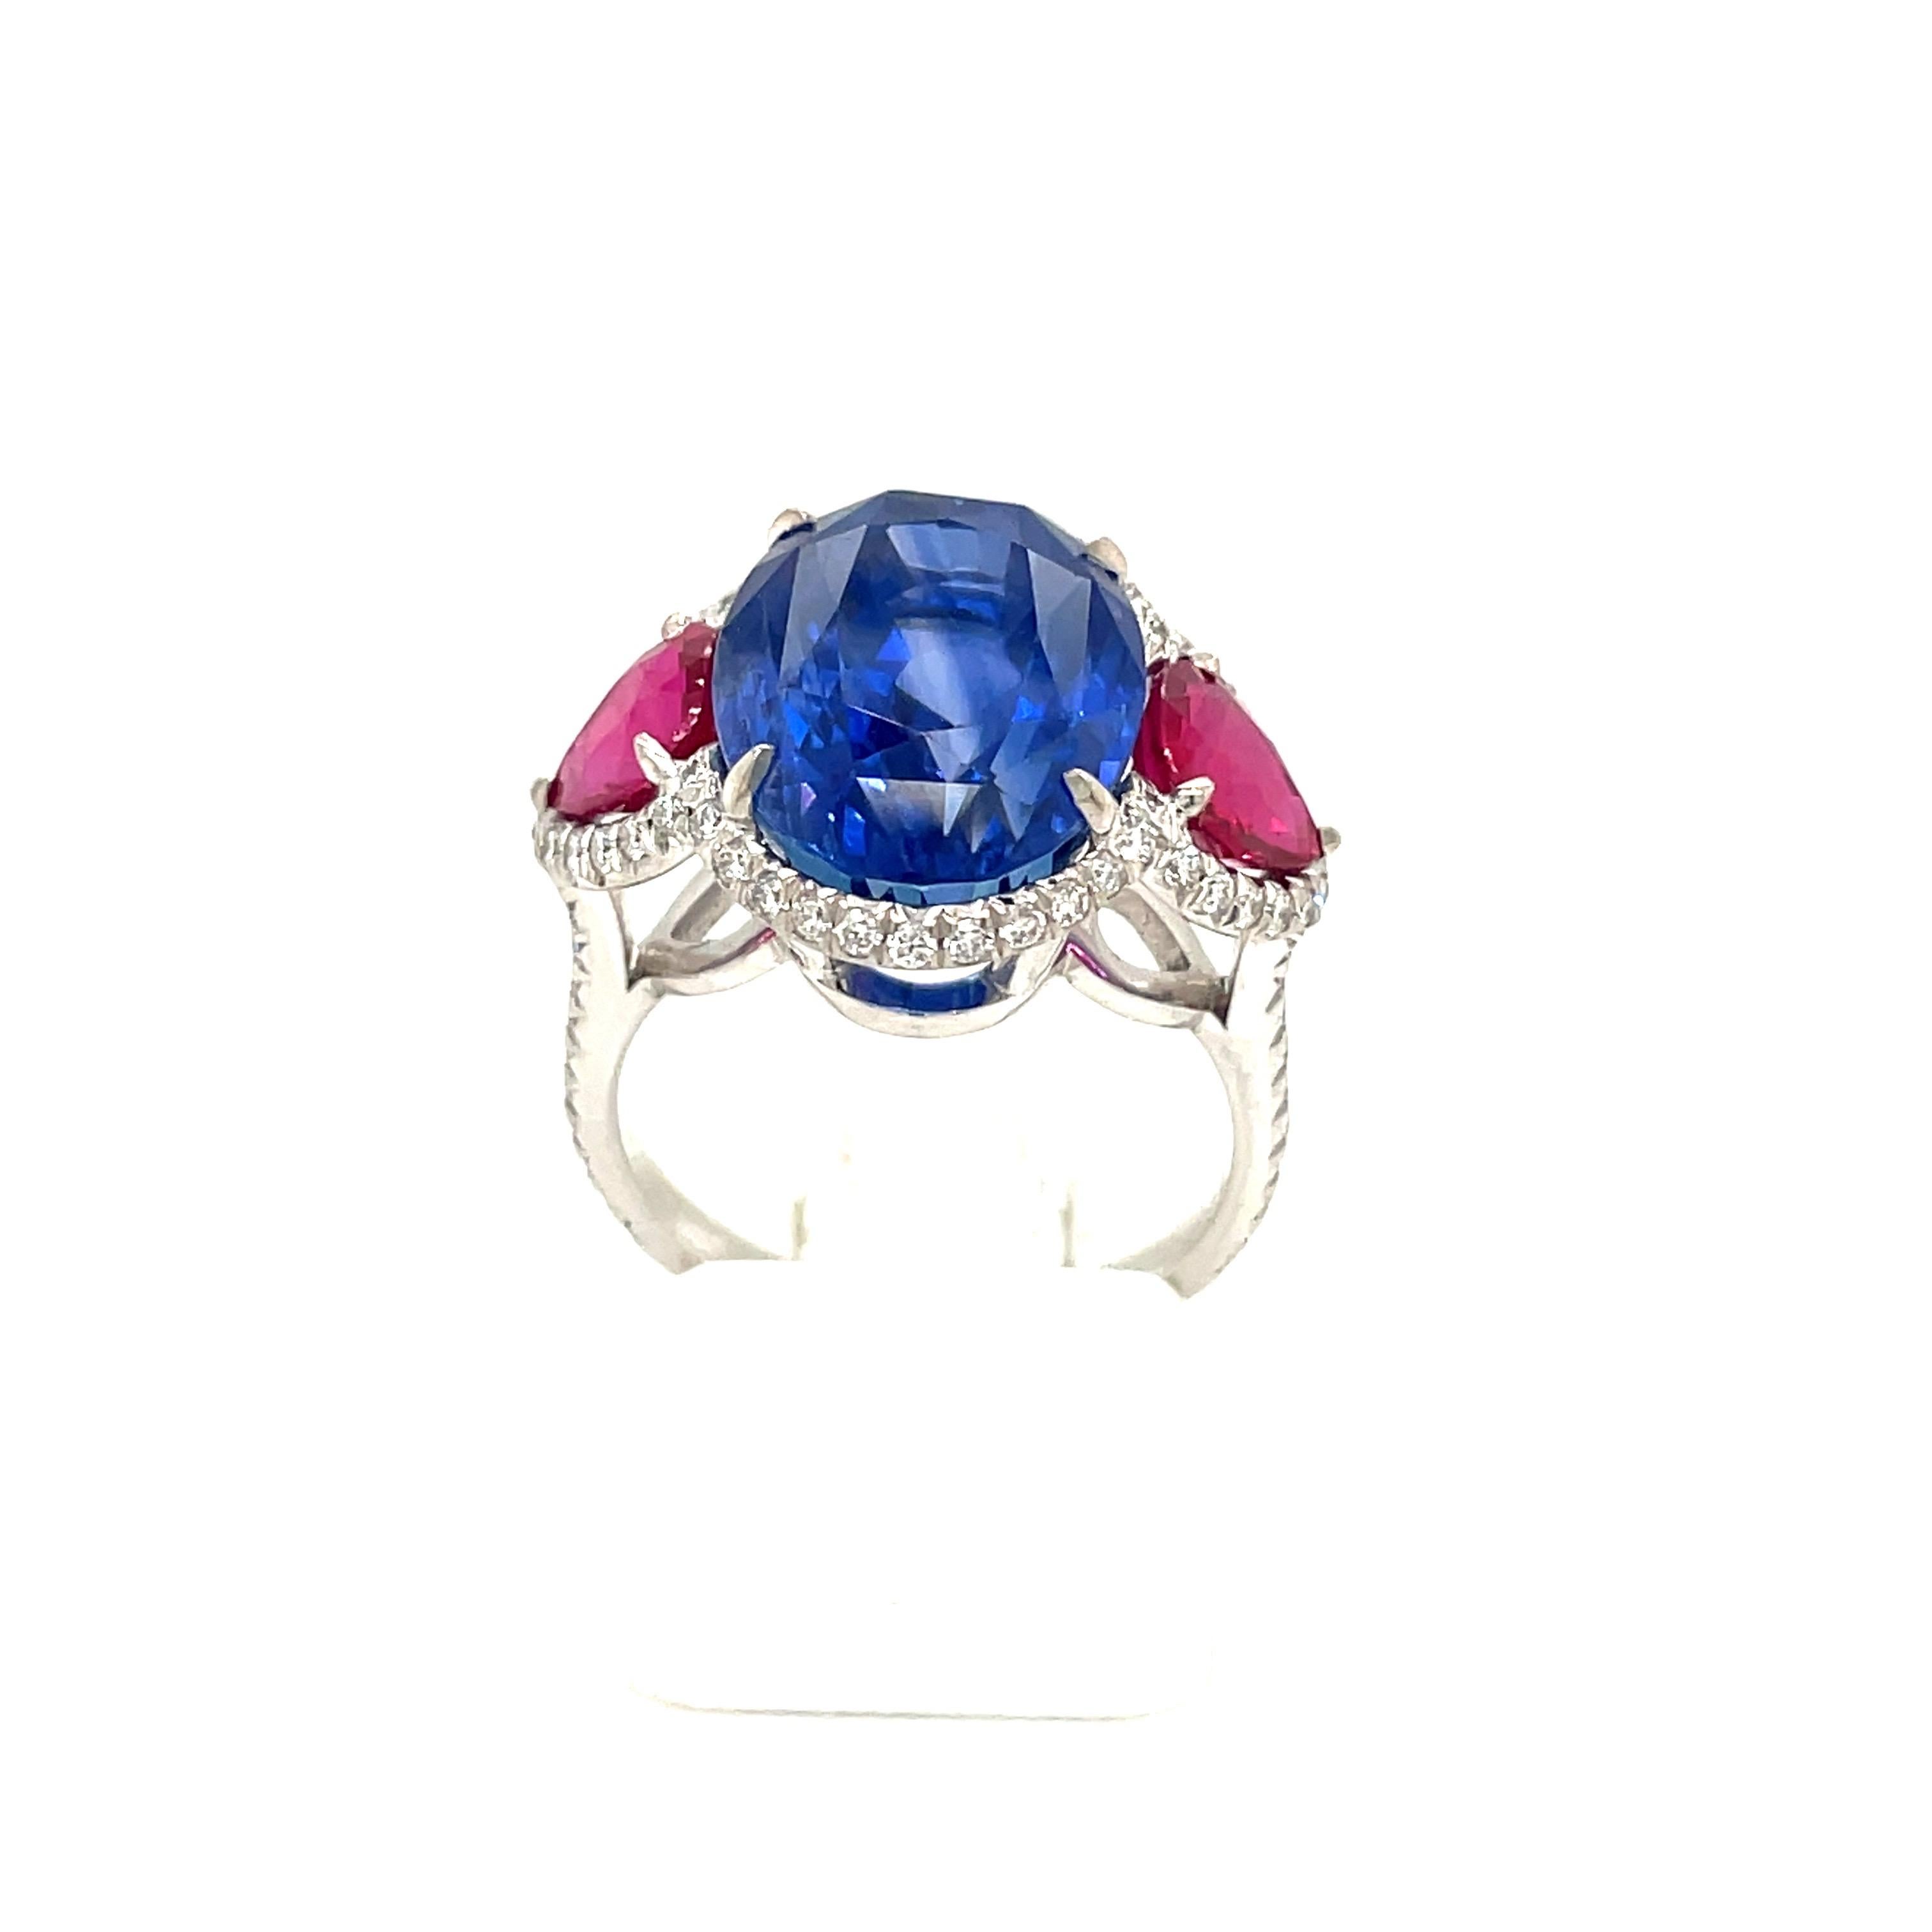 A truly spectacular 13.26 carat Ceylon Sapphire flanked with 2.02 carats of AGL certified Burma Rubies set 18kt white gold in a halo of white diamonds. 